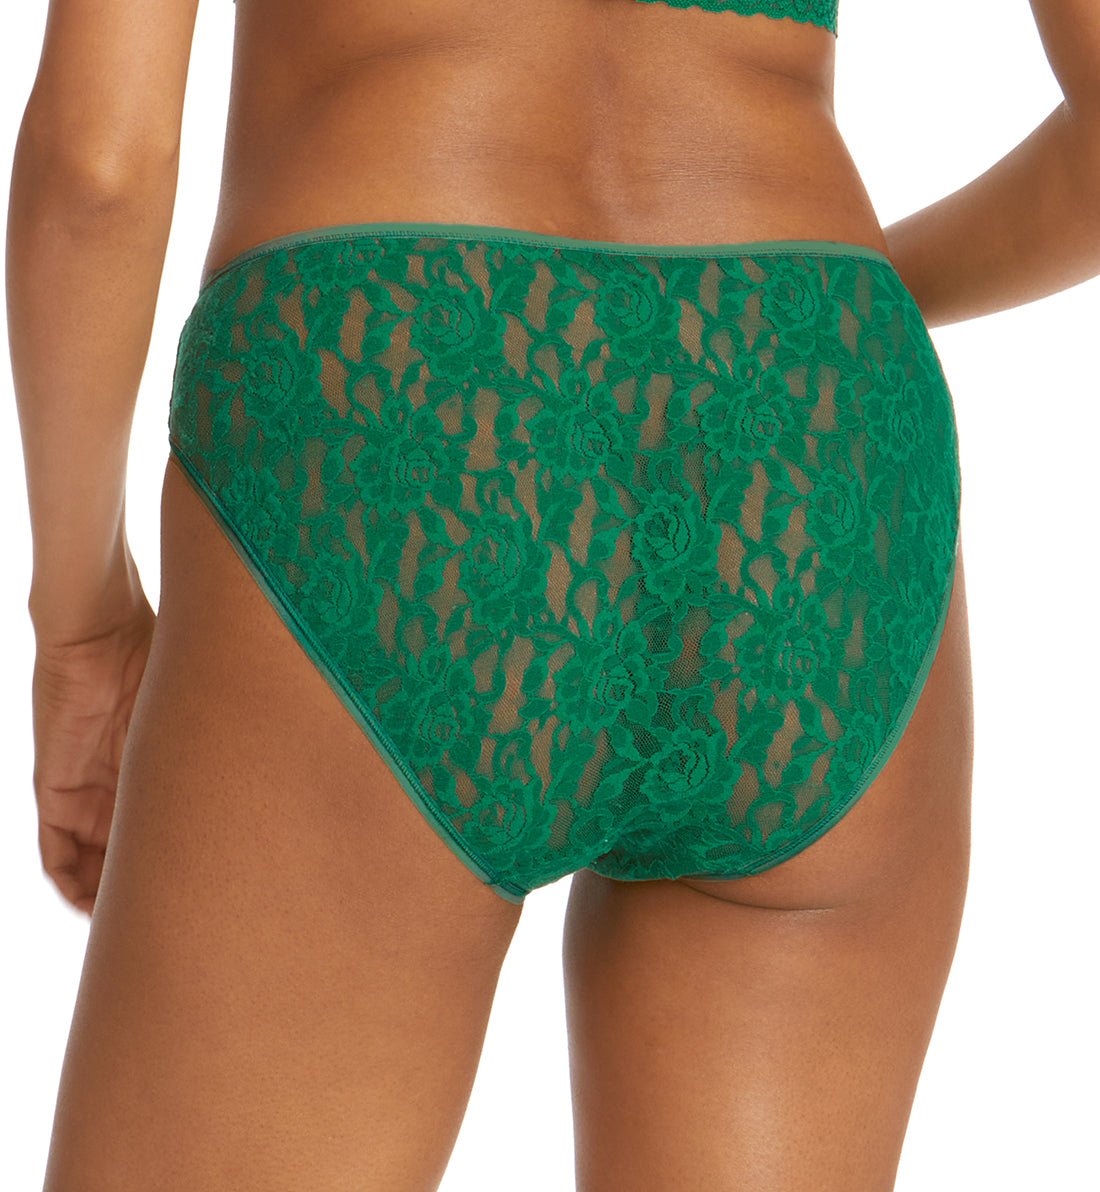 Hanky Panky Signature Lace High Cut Brief (482264),XS,Green Envy - Green Envy,XS